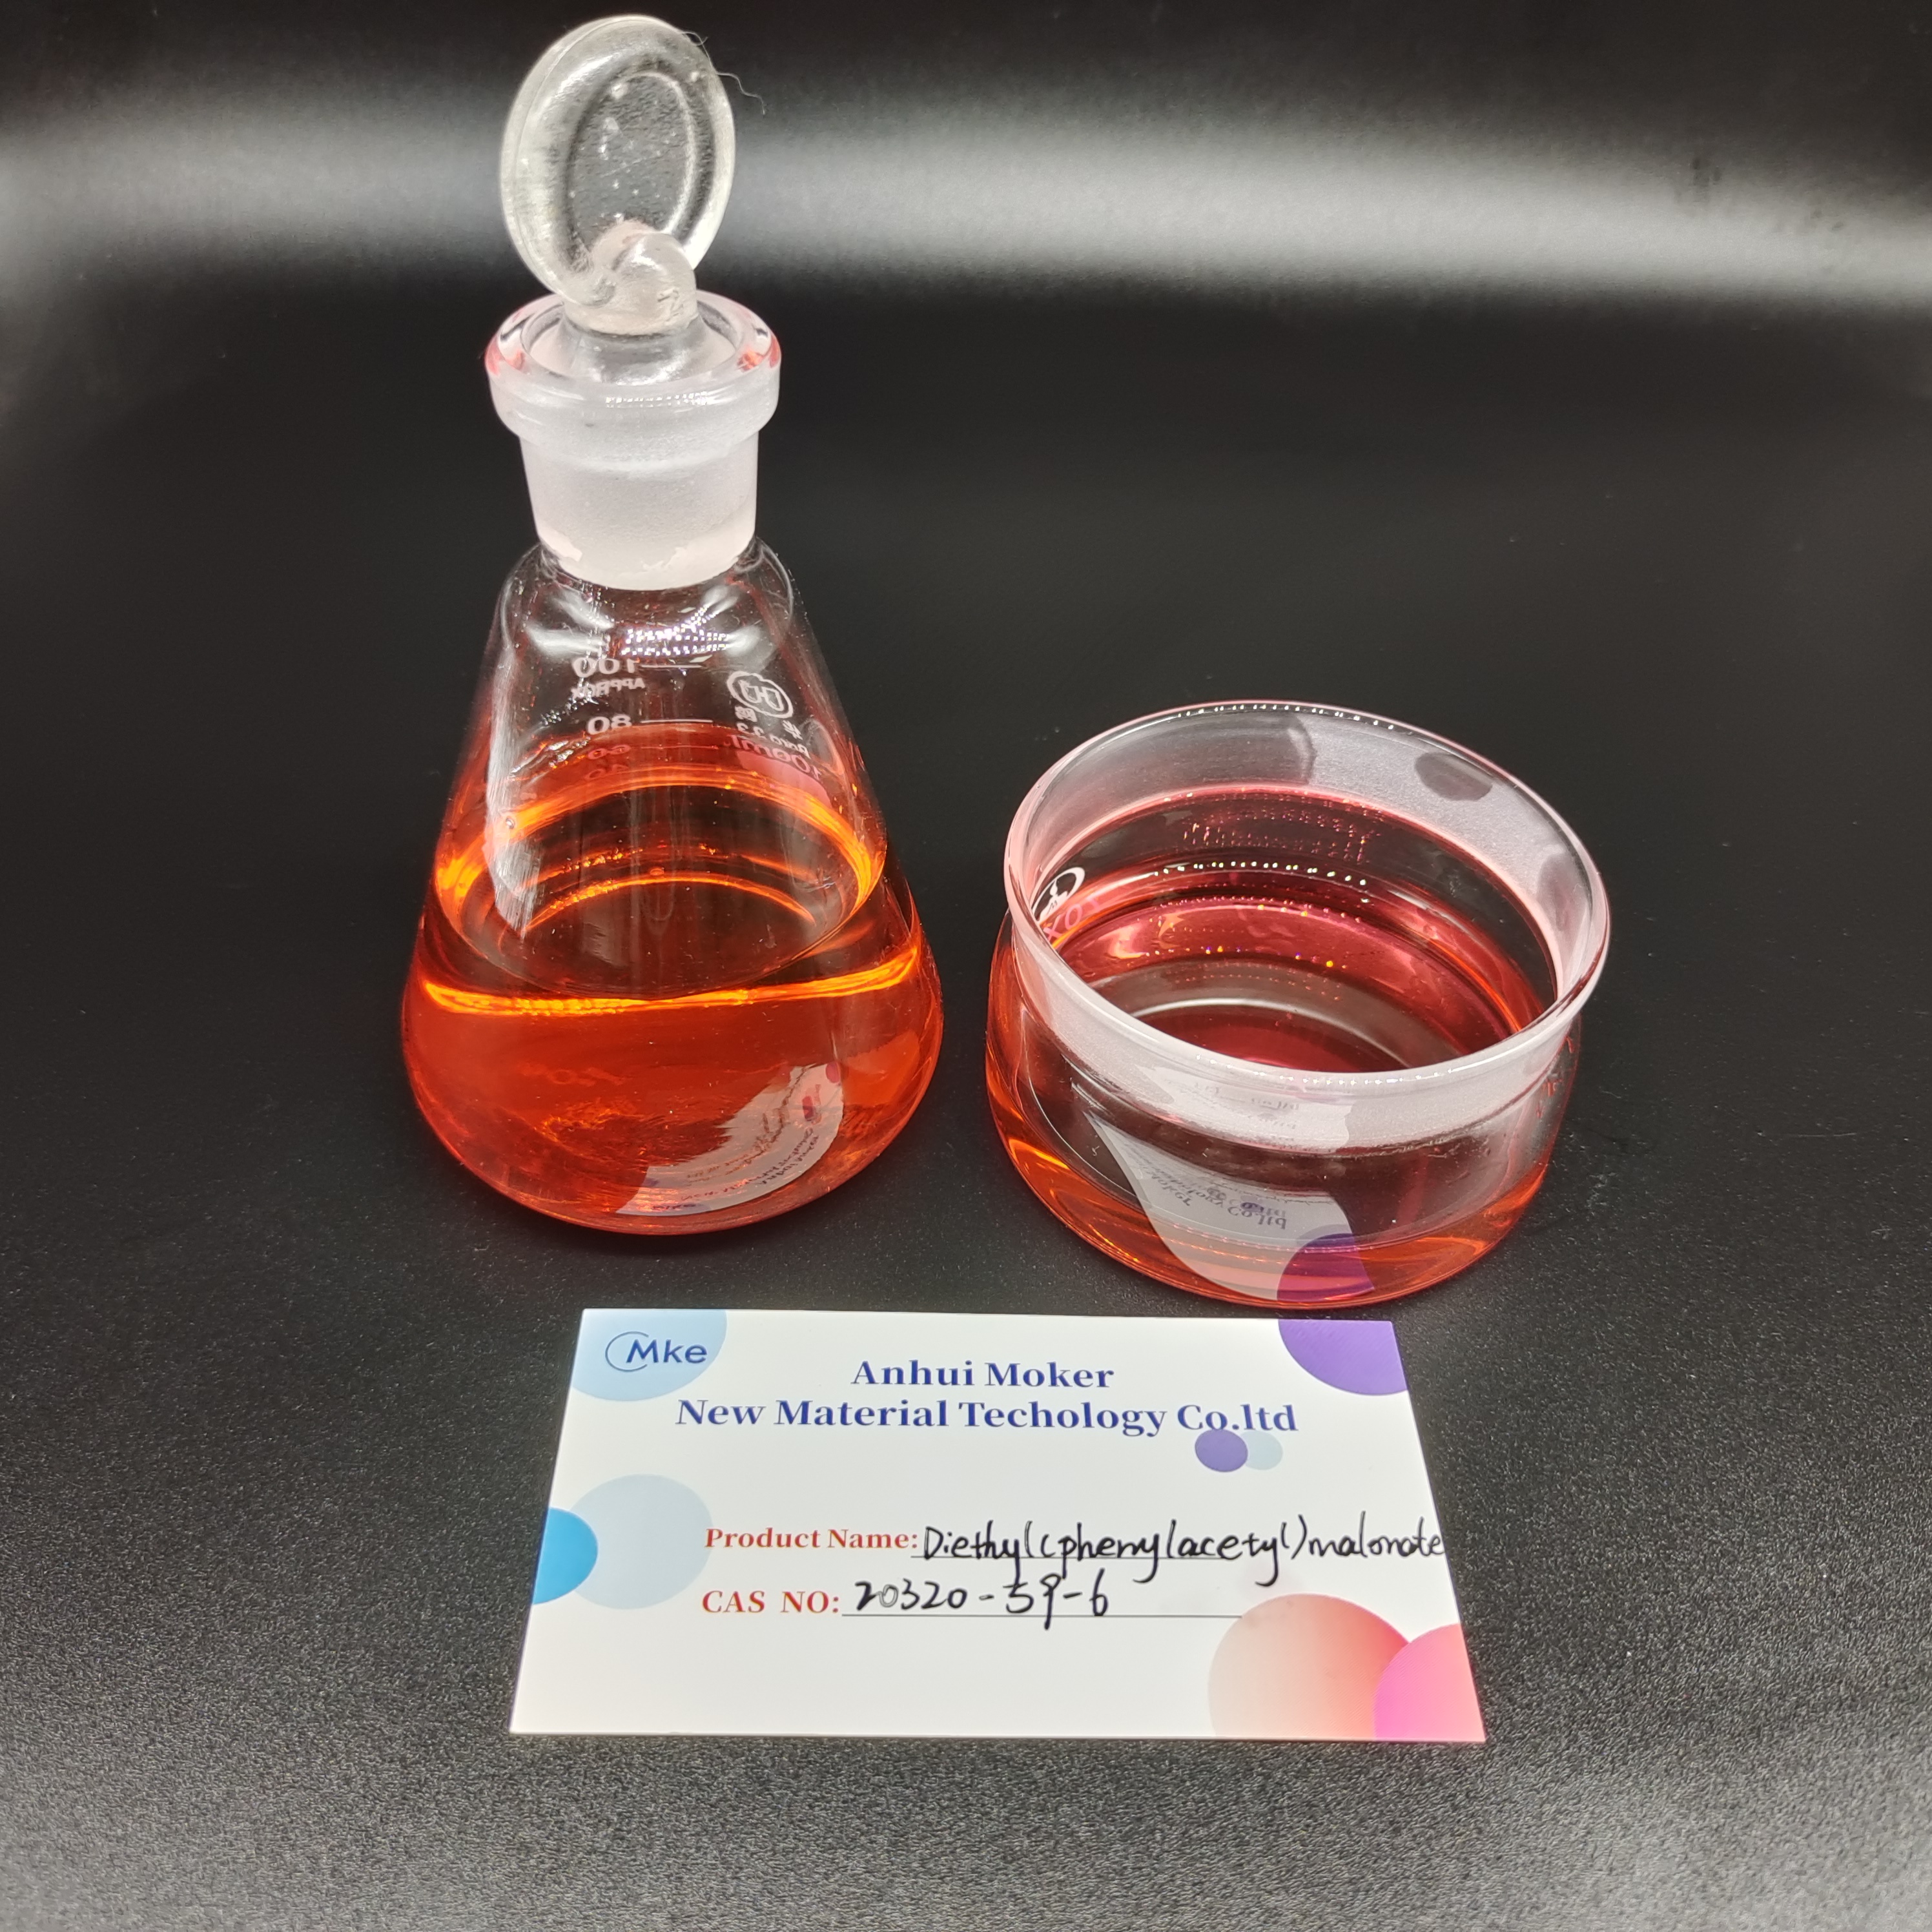 New BMK Glycidate Oil CAS 20320-59-6 with Safe Delivery